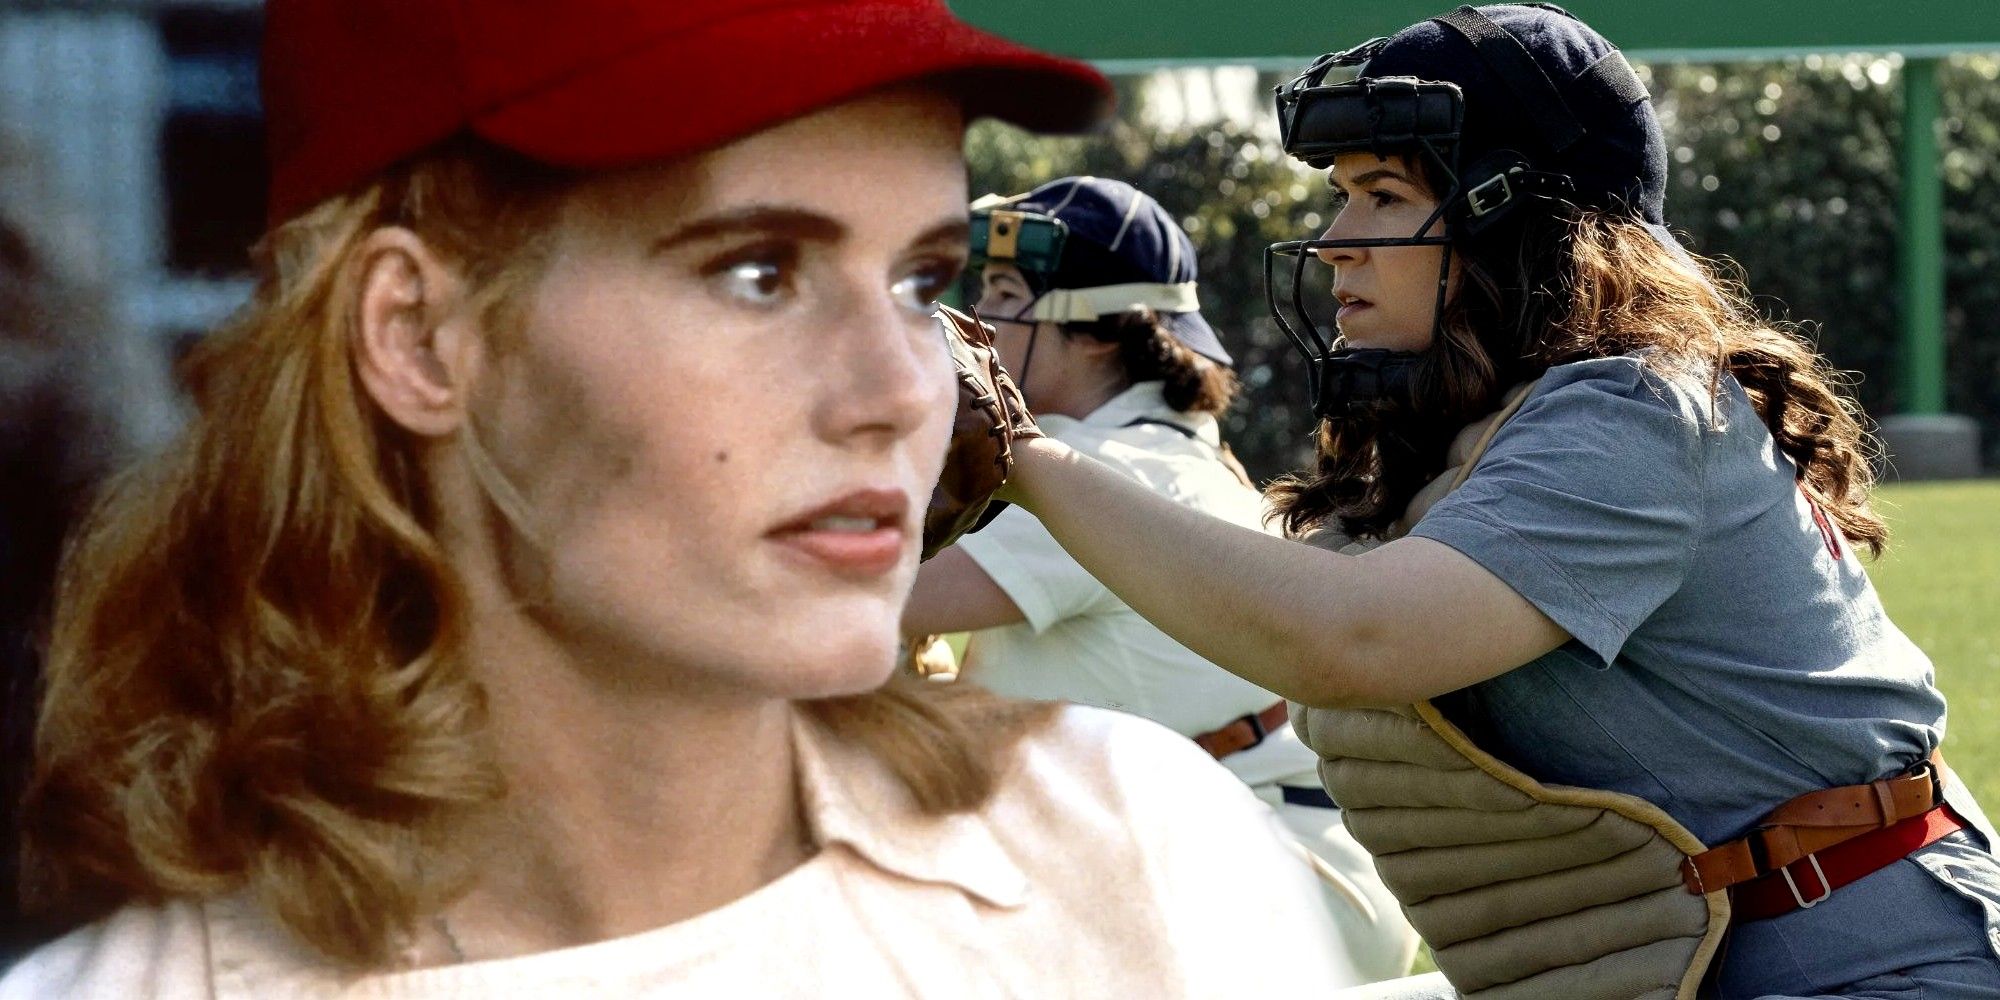 A League of Their Own' is based on the 1992 movie, but has an